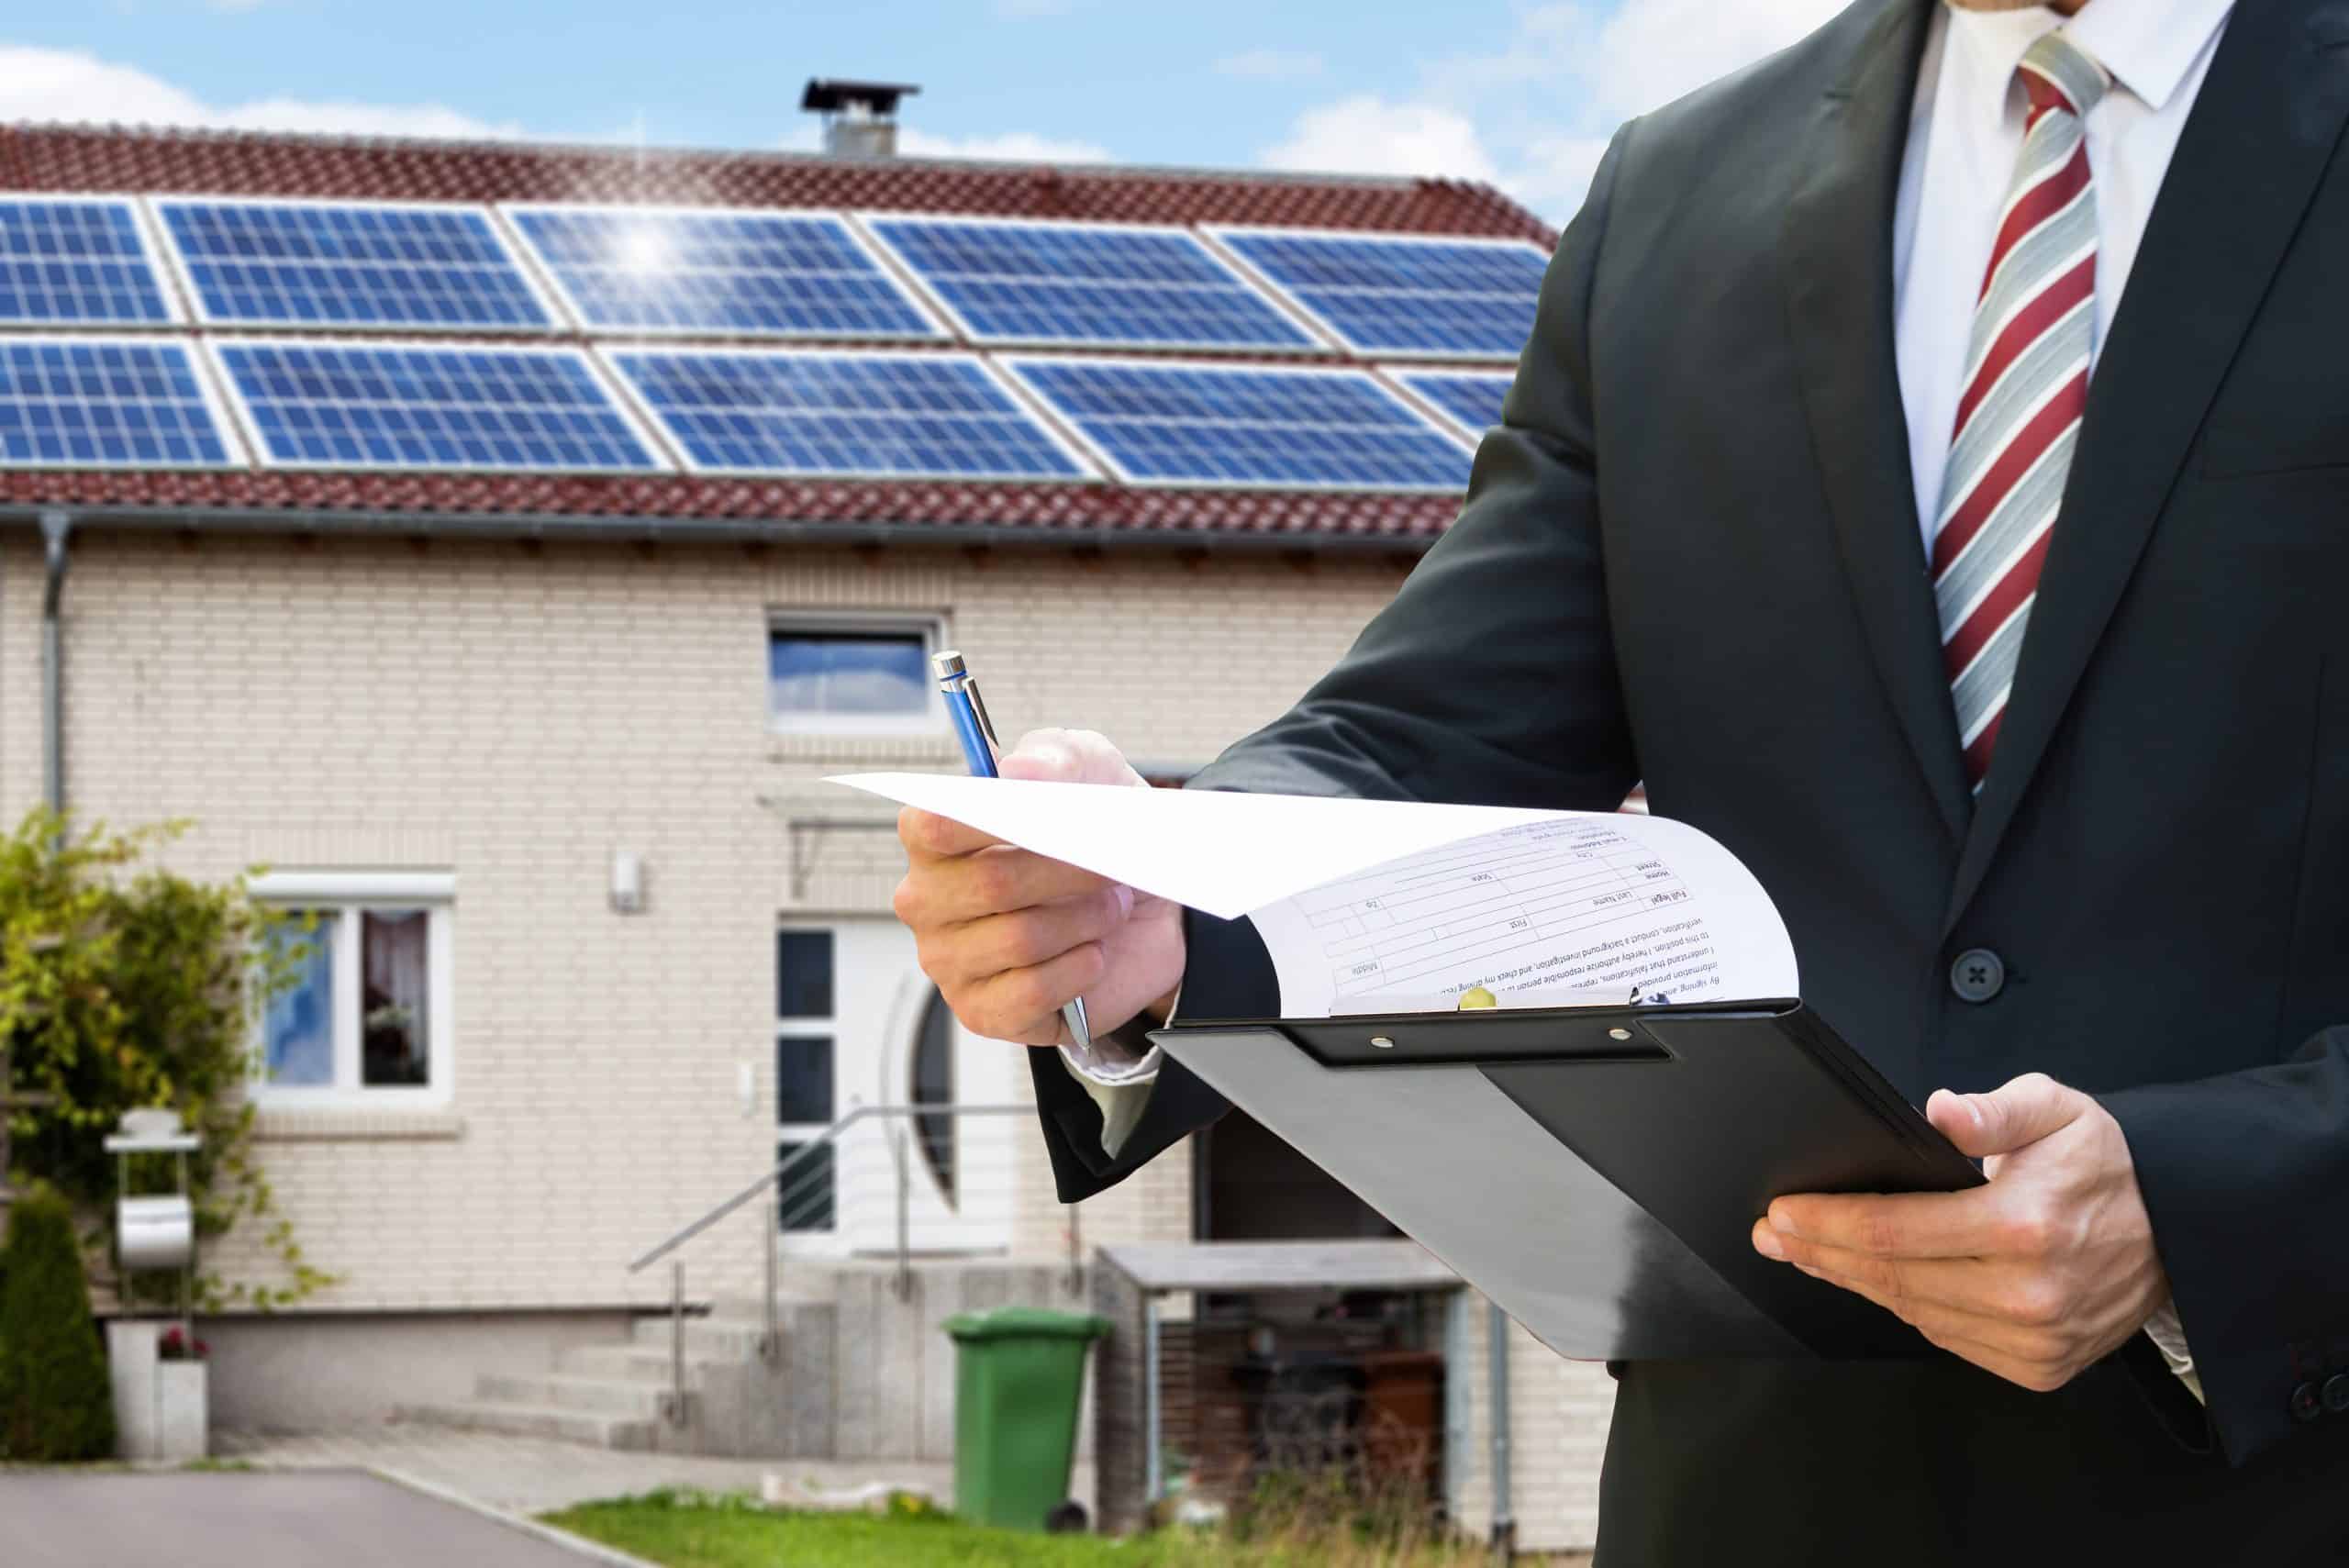 Midsection Of A Man Checking Documents Standing Near House With Solar Panels On Roof